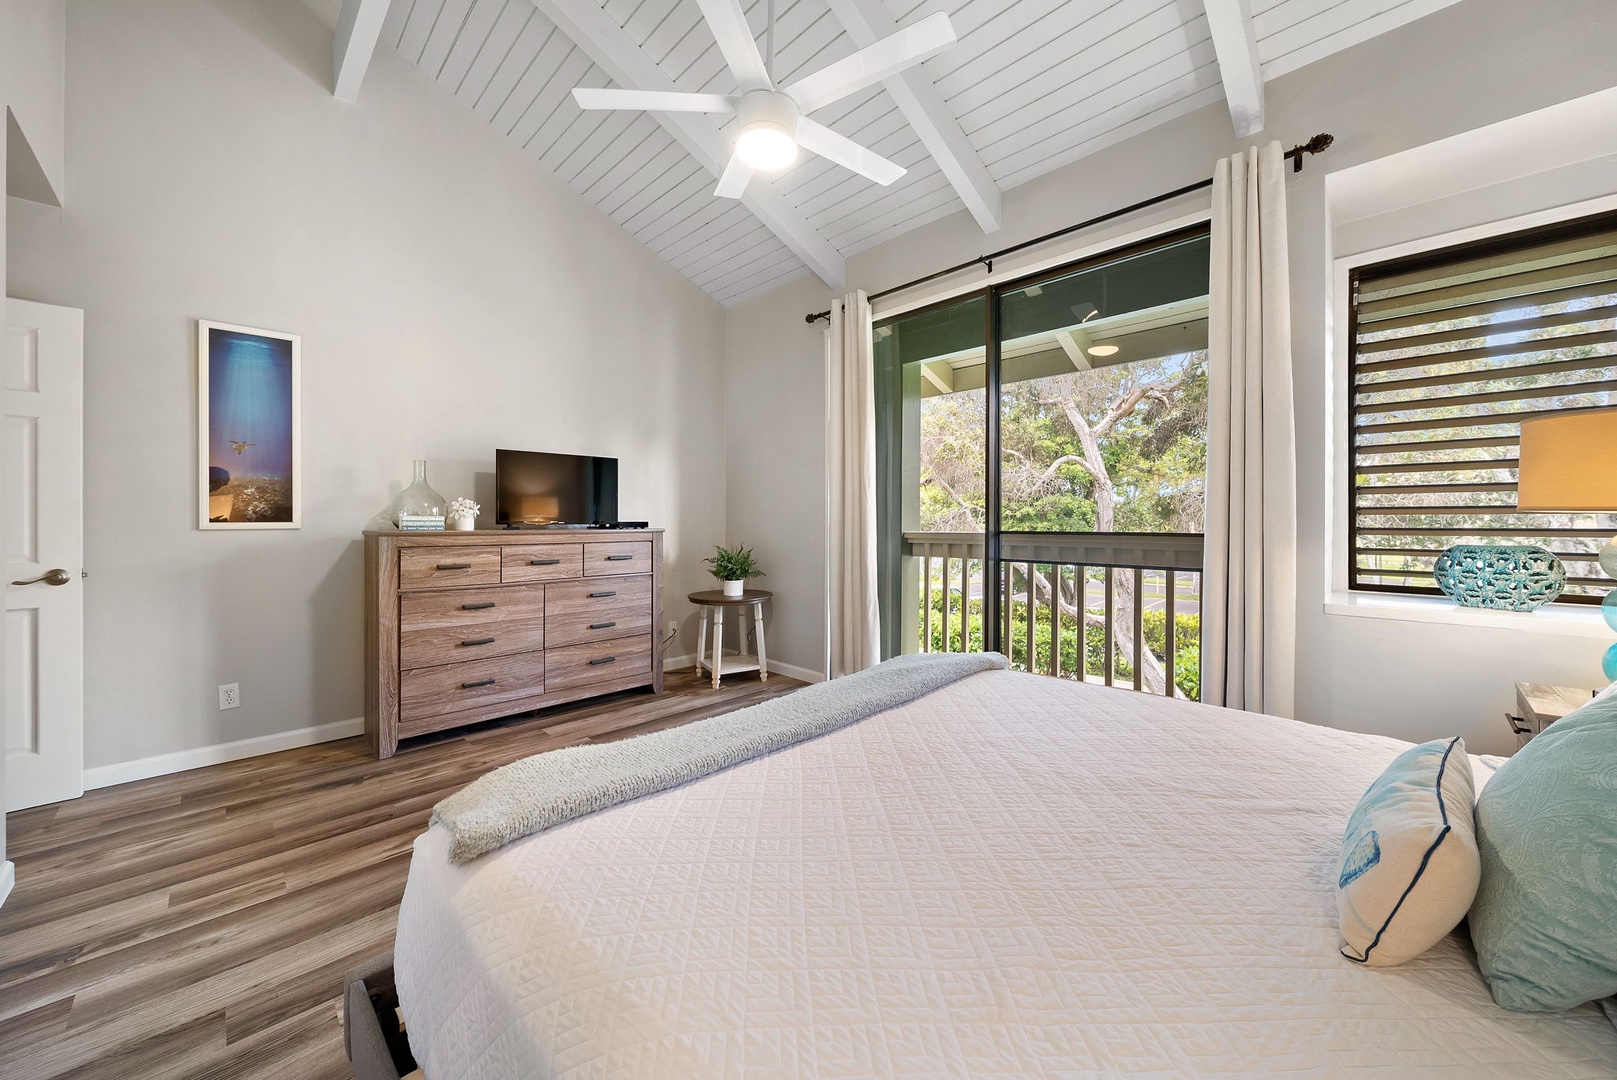 Kahuku Vacation Rentals, Kuilima Estates West #120 - Mountain views from your king size bed.